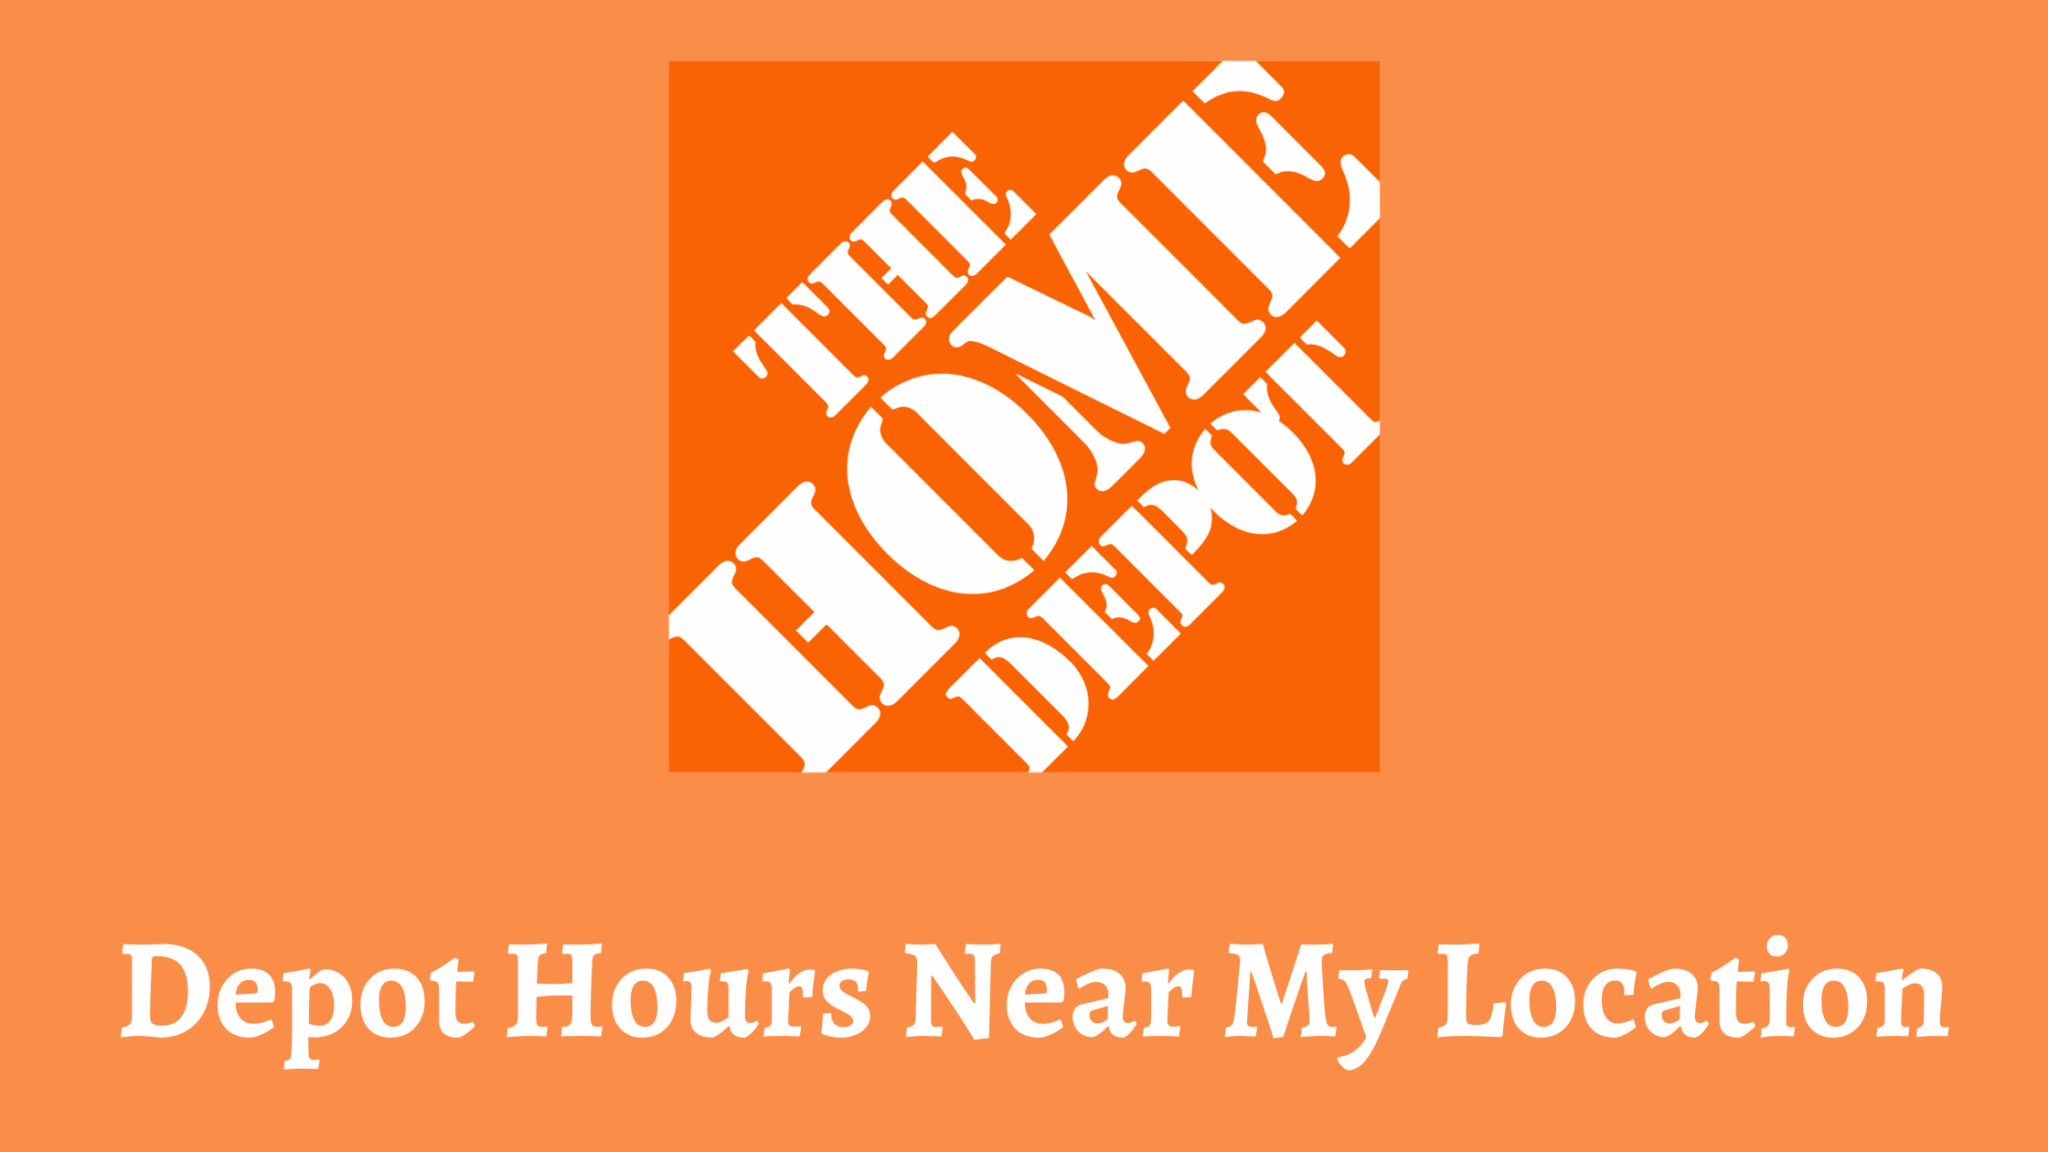 Home Depot Hours When HomeDepot Open And Close SolutionBlades